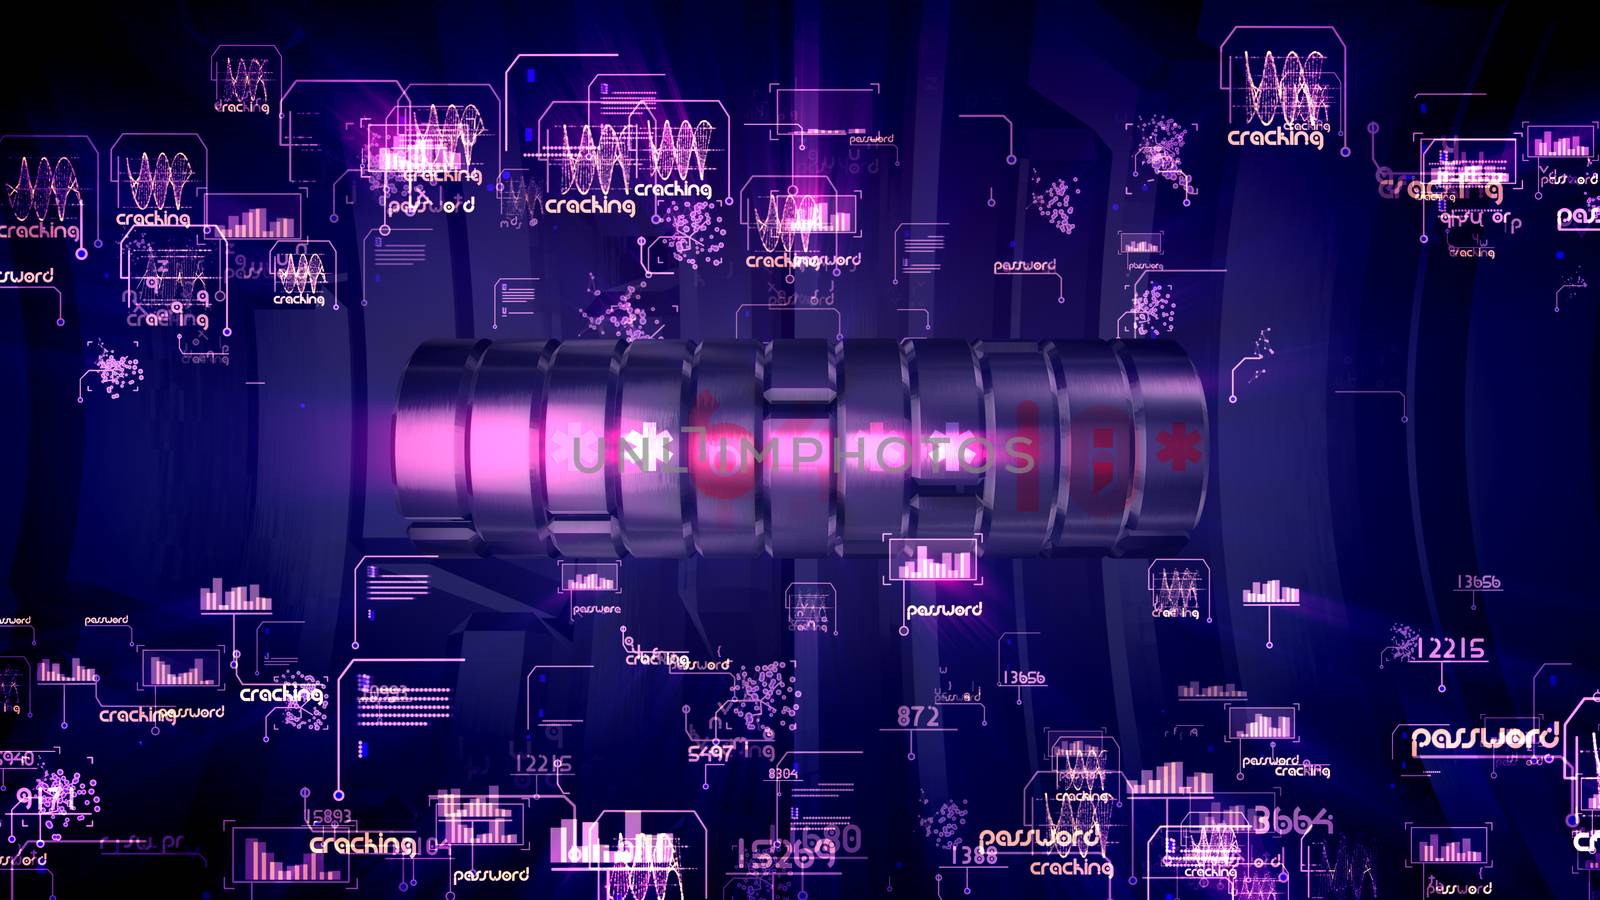 Solid 3d illustration of a spinning metallic password piston with shimmering digits, words and diagrams in the violet background. It looks reliable, optimistic and hi-tech.